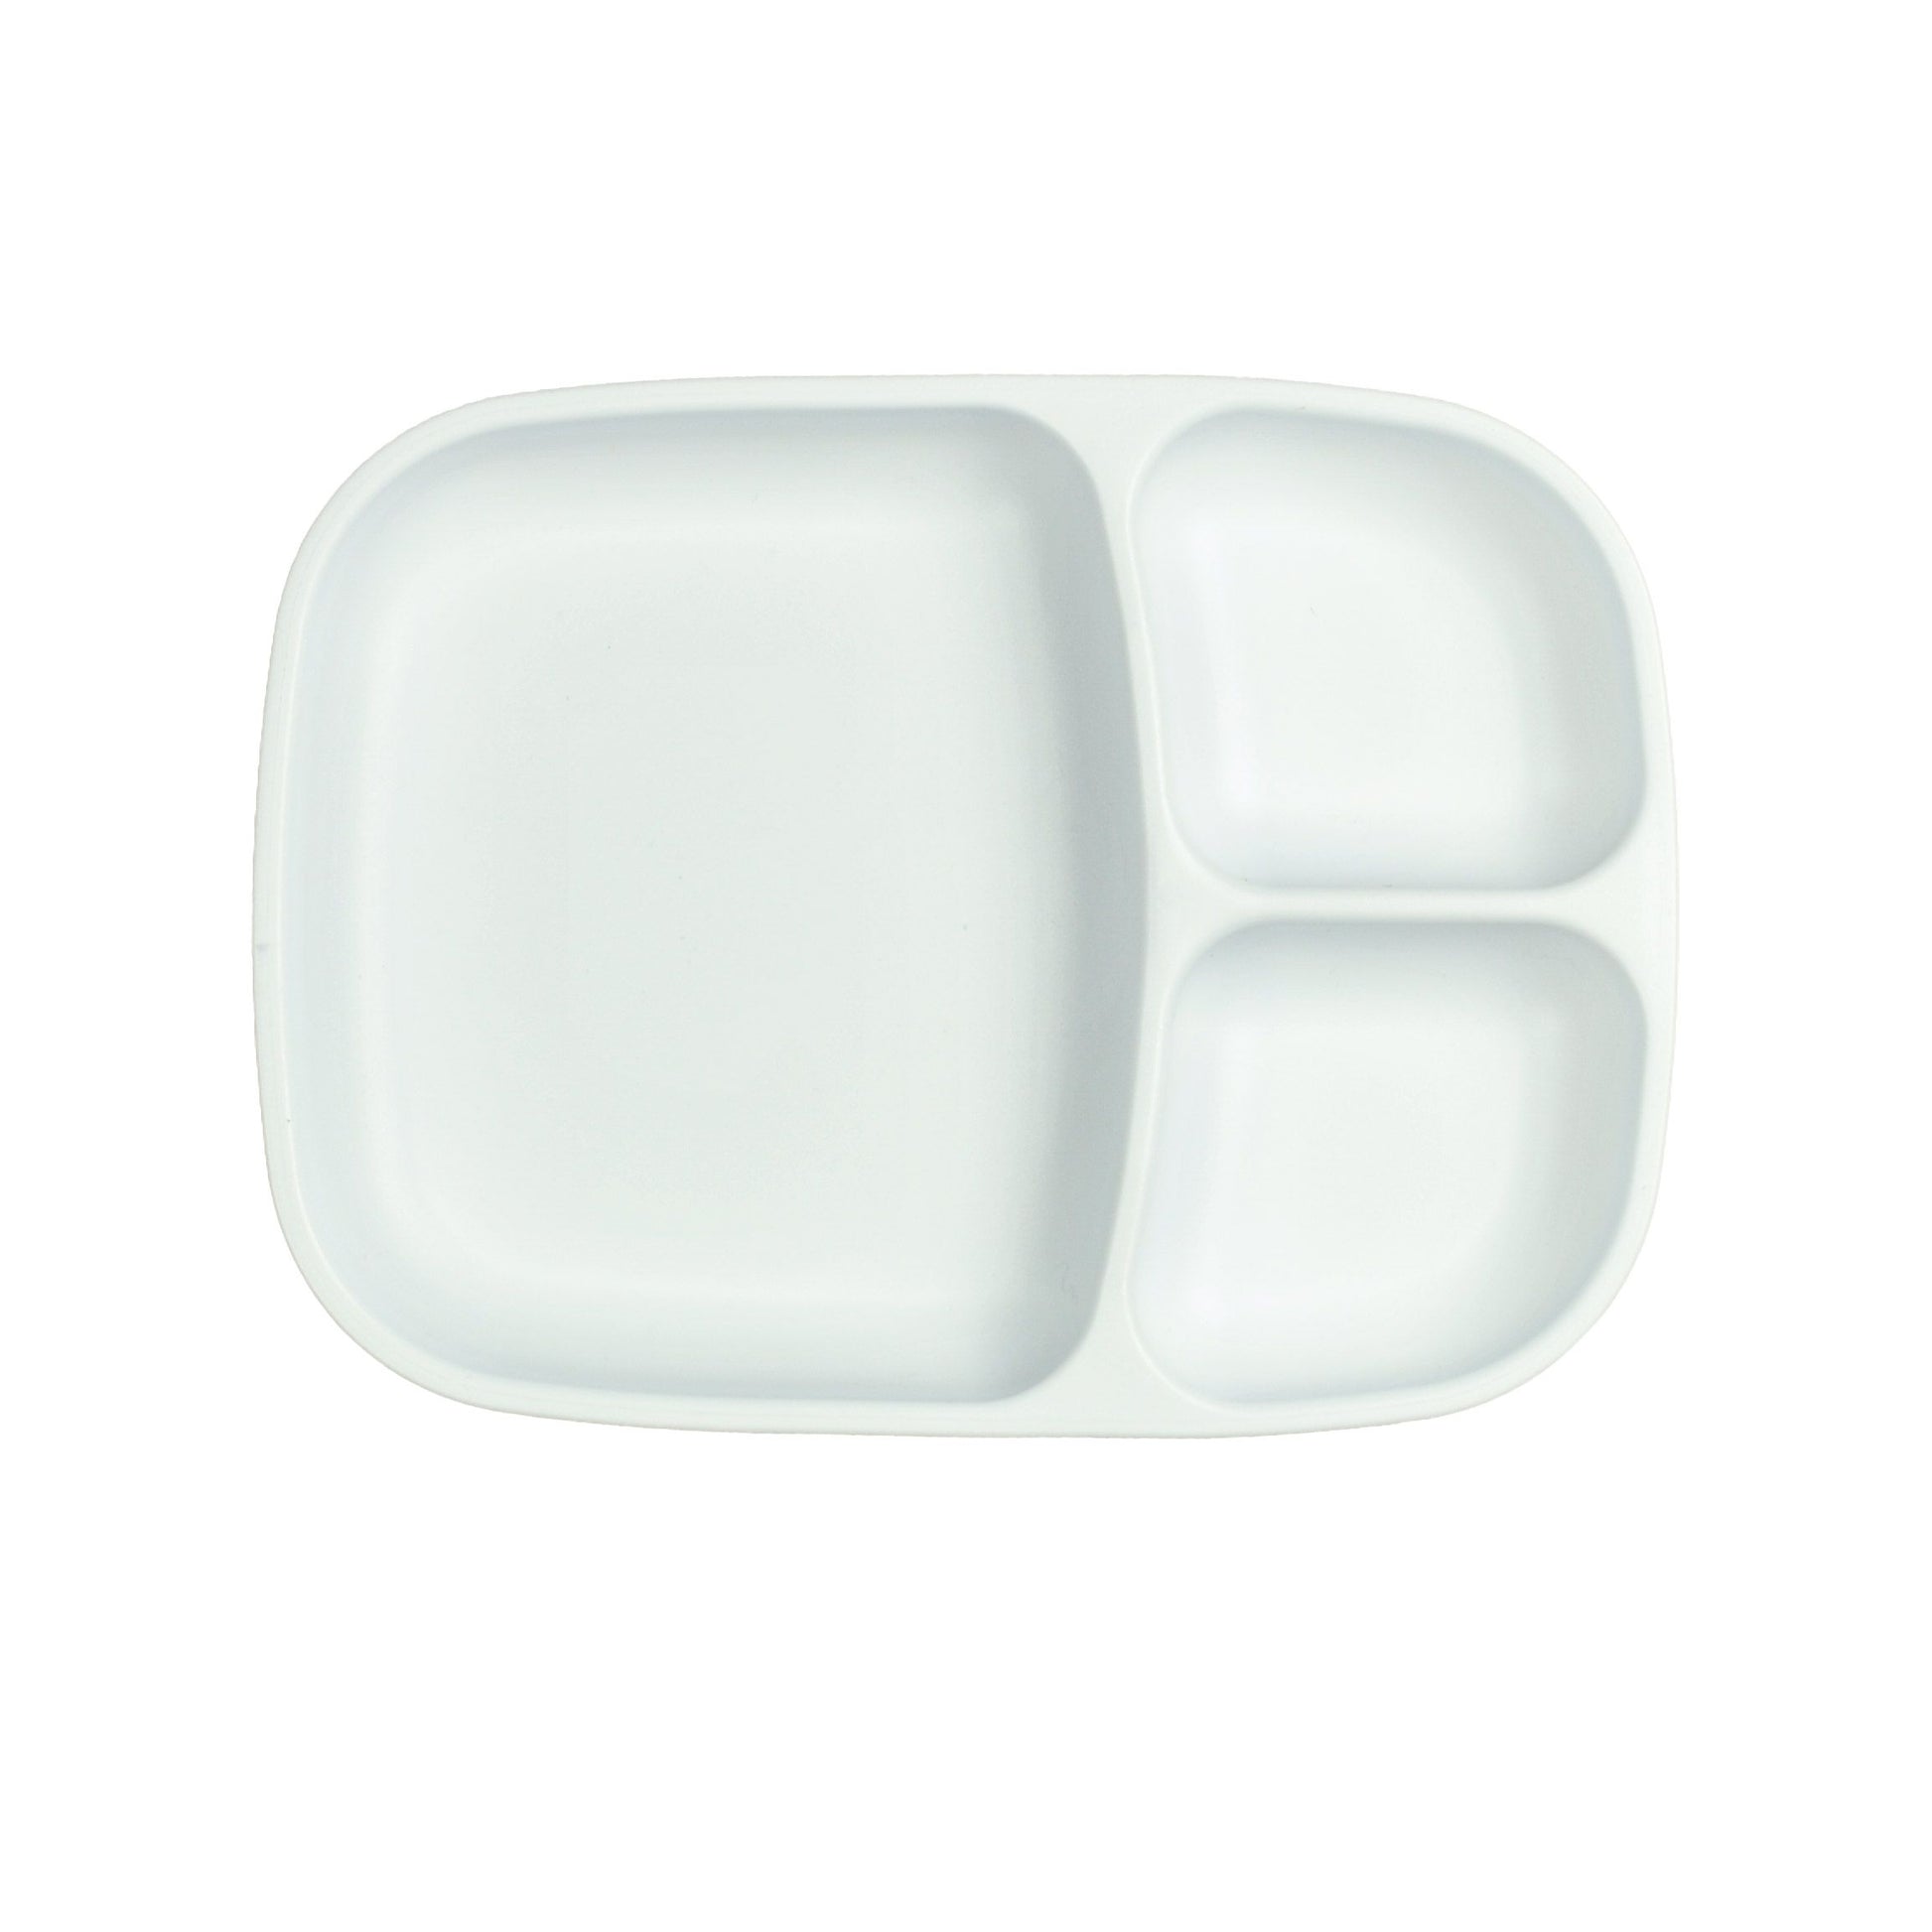 Replay Divided Tray - White